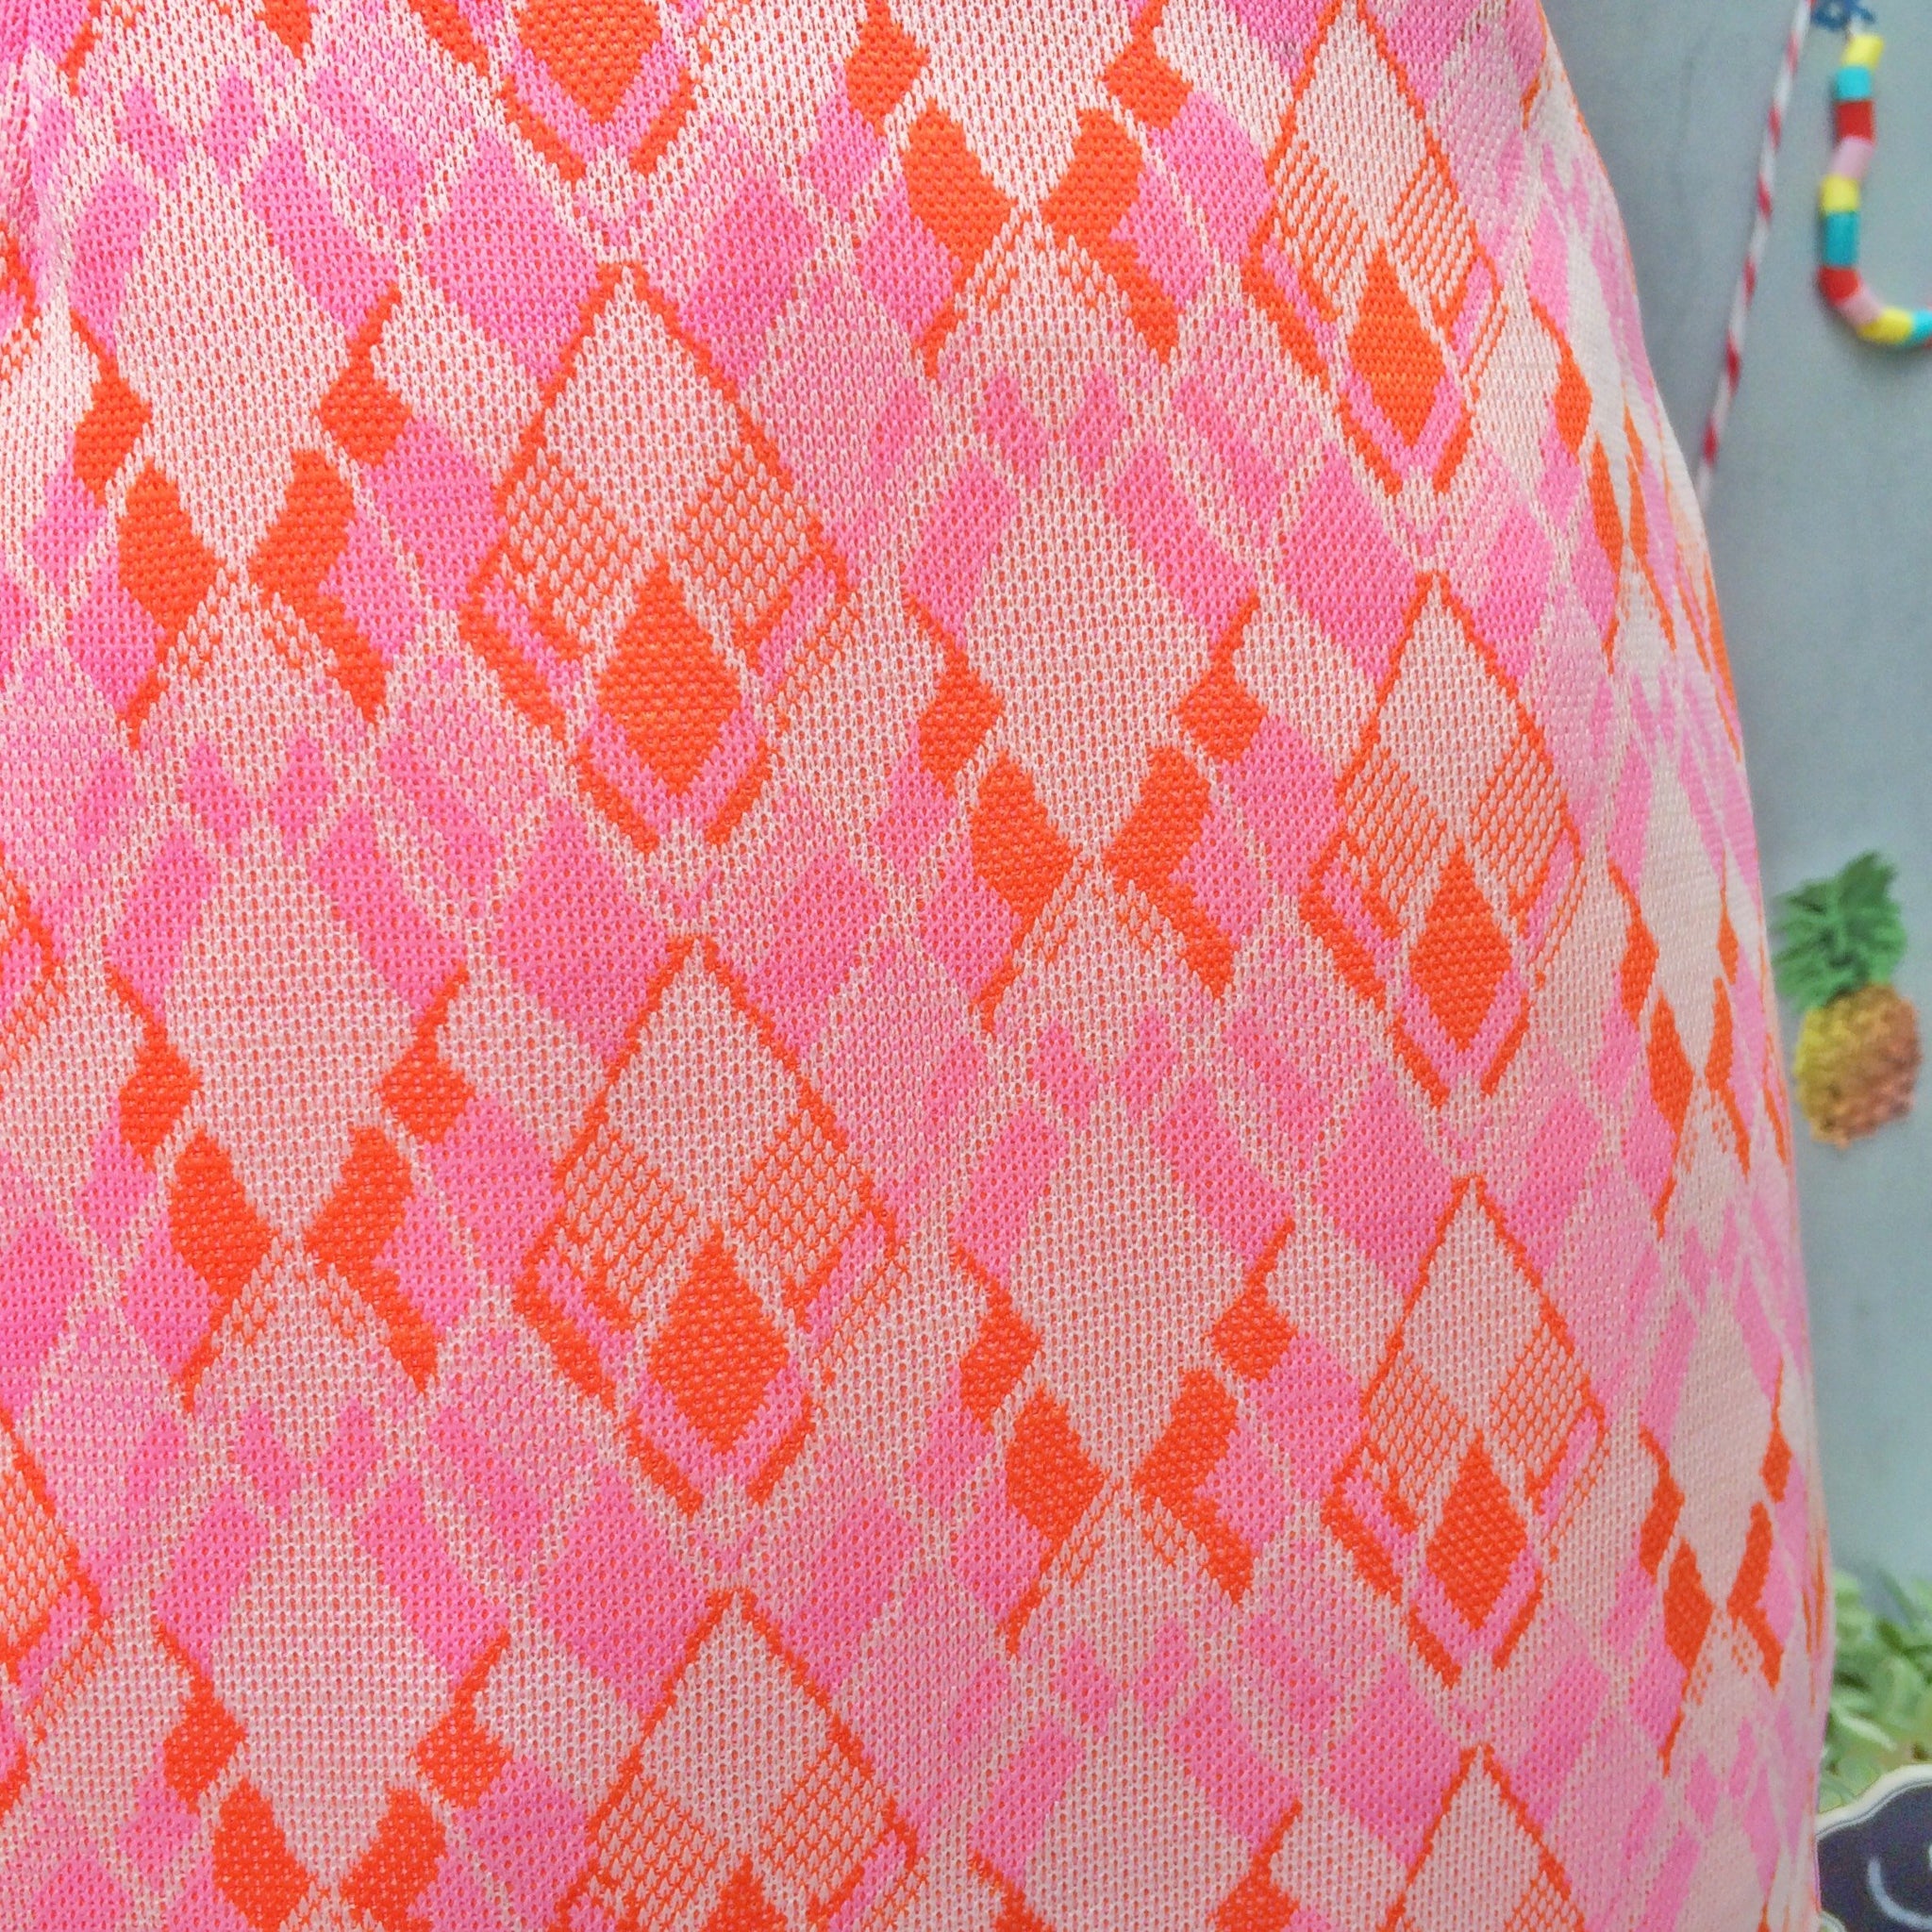 SALE! | Pink Prints | Vintage 1960s mini skirt in Geometric pink, vermillion and reds